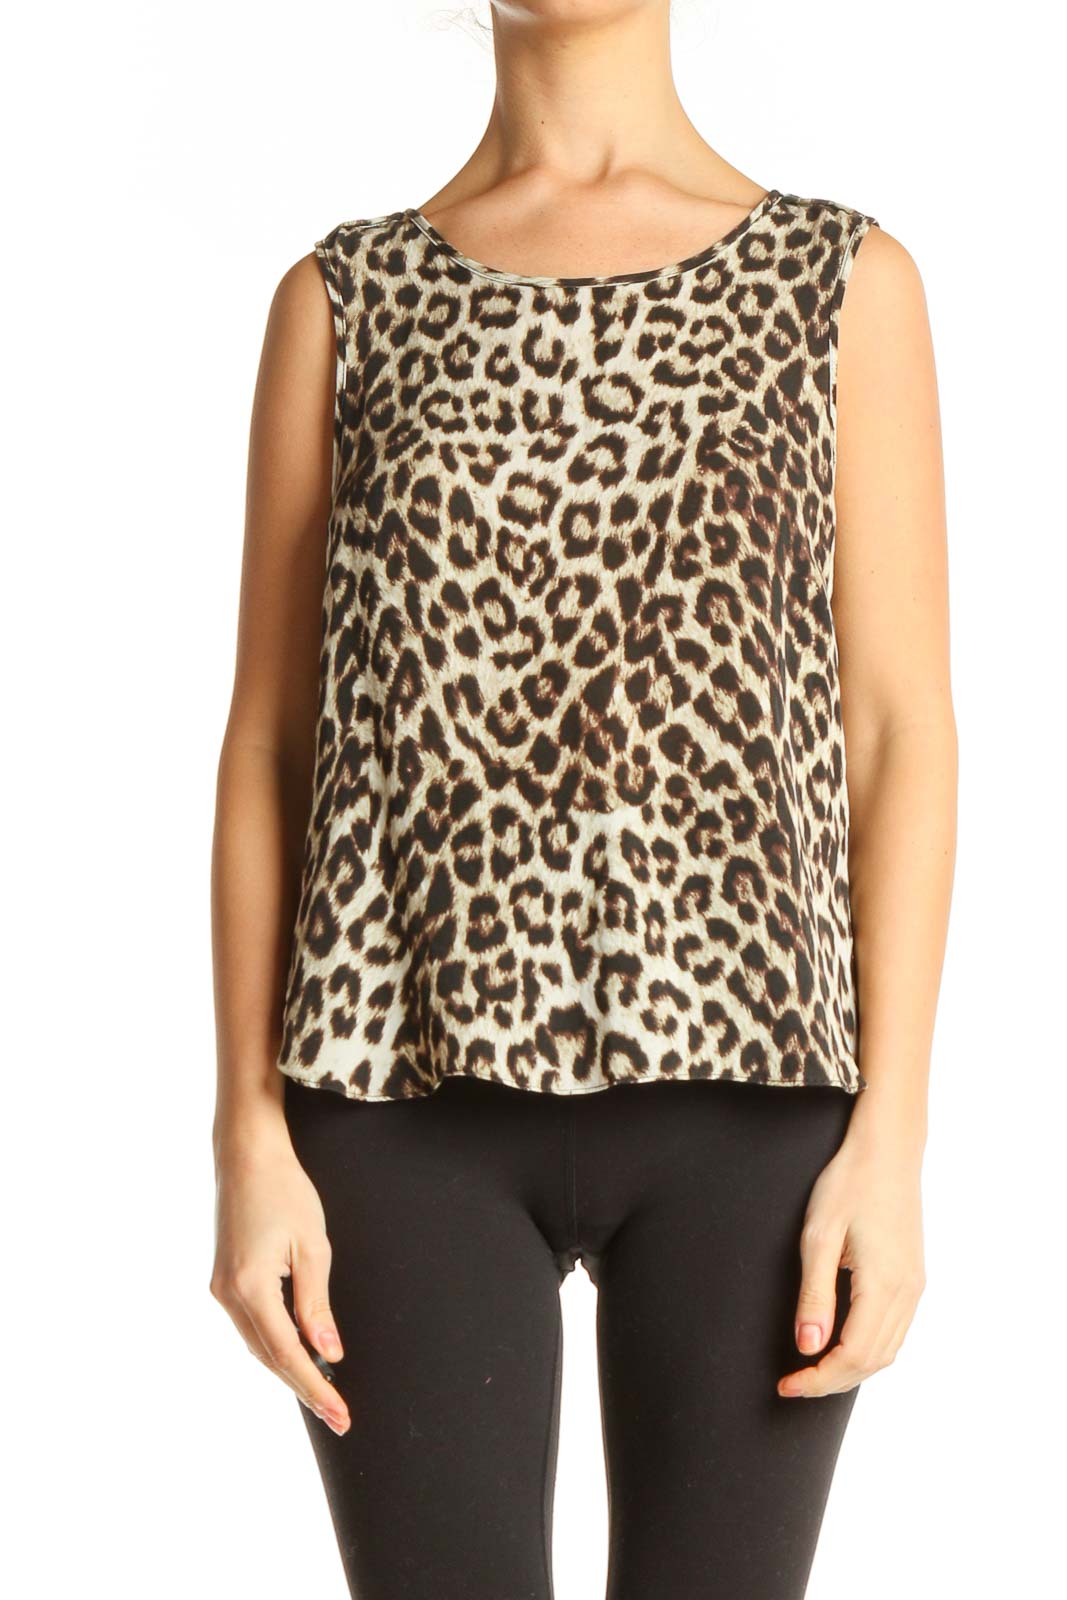 Black Animal Print All Day Wear Blouse Front